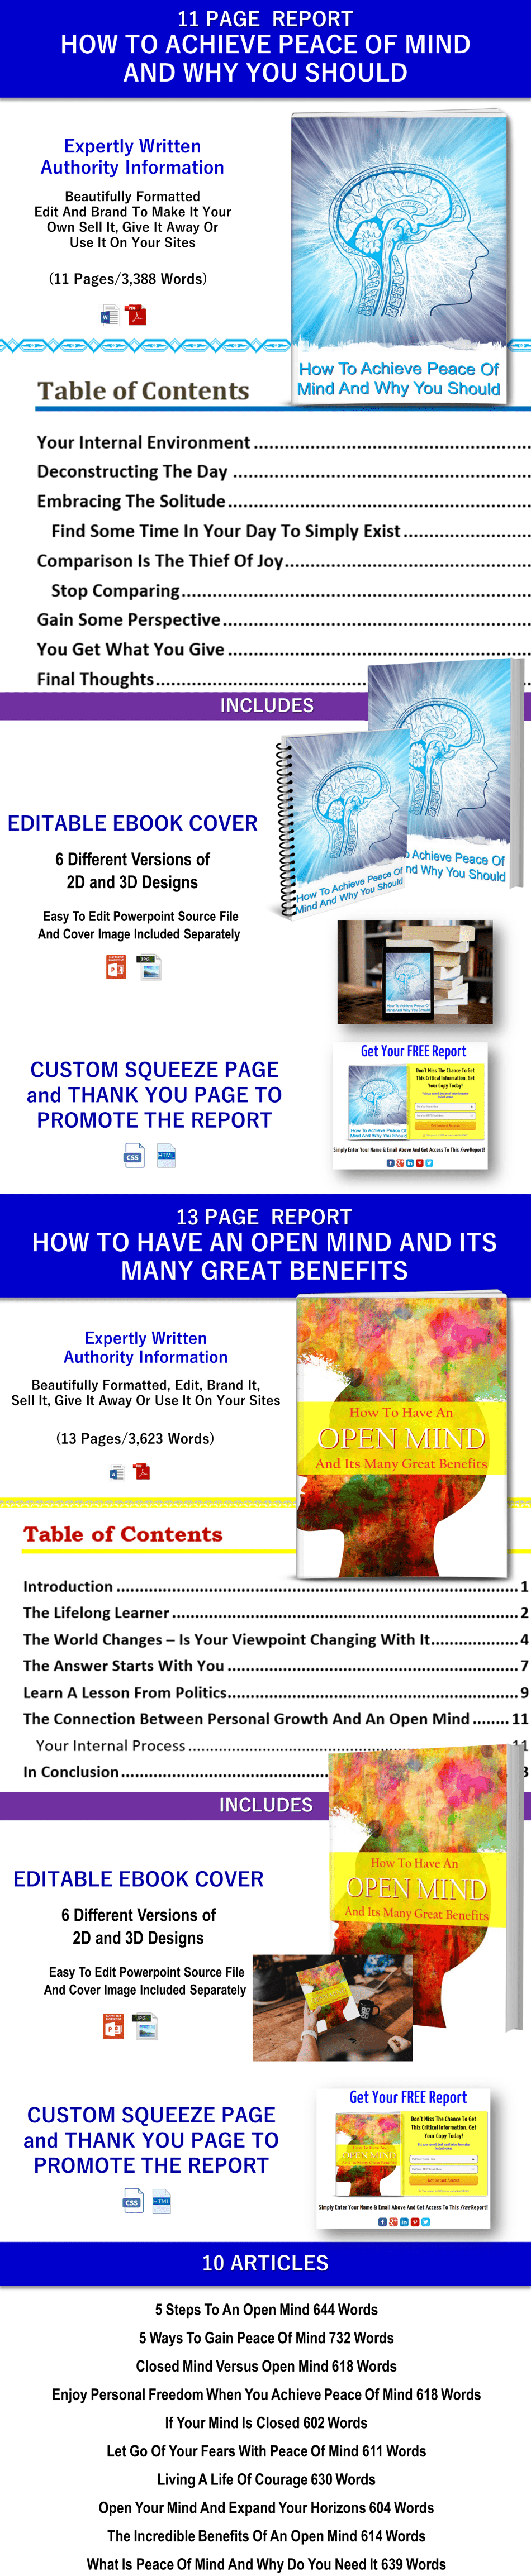 open mind and peace of mind reports articles plr